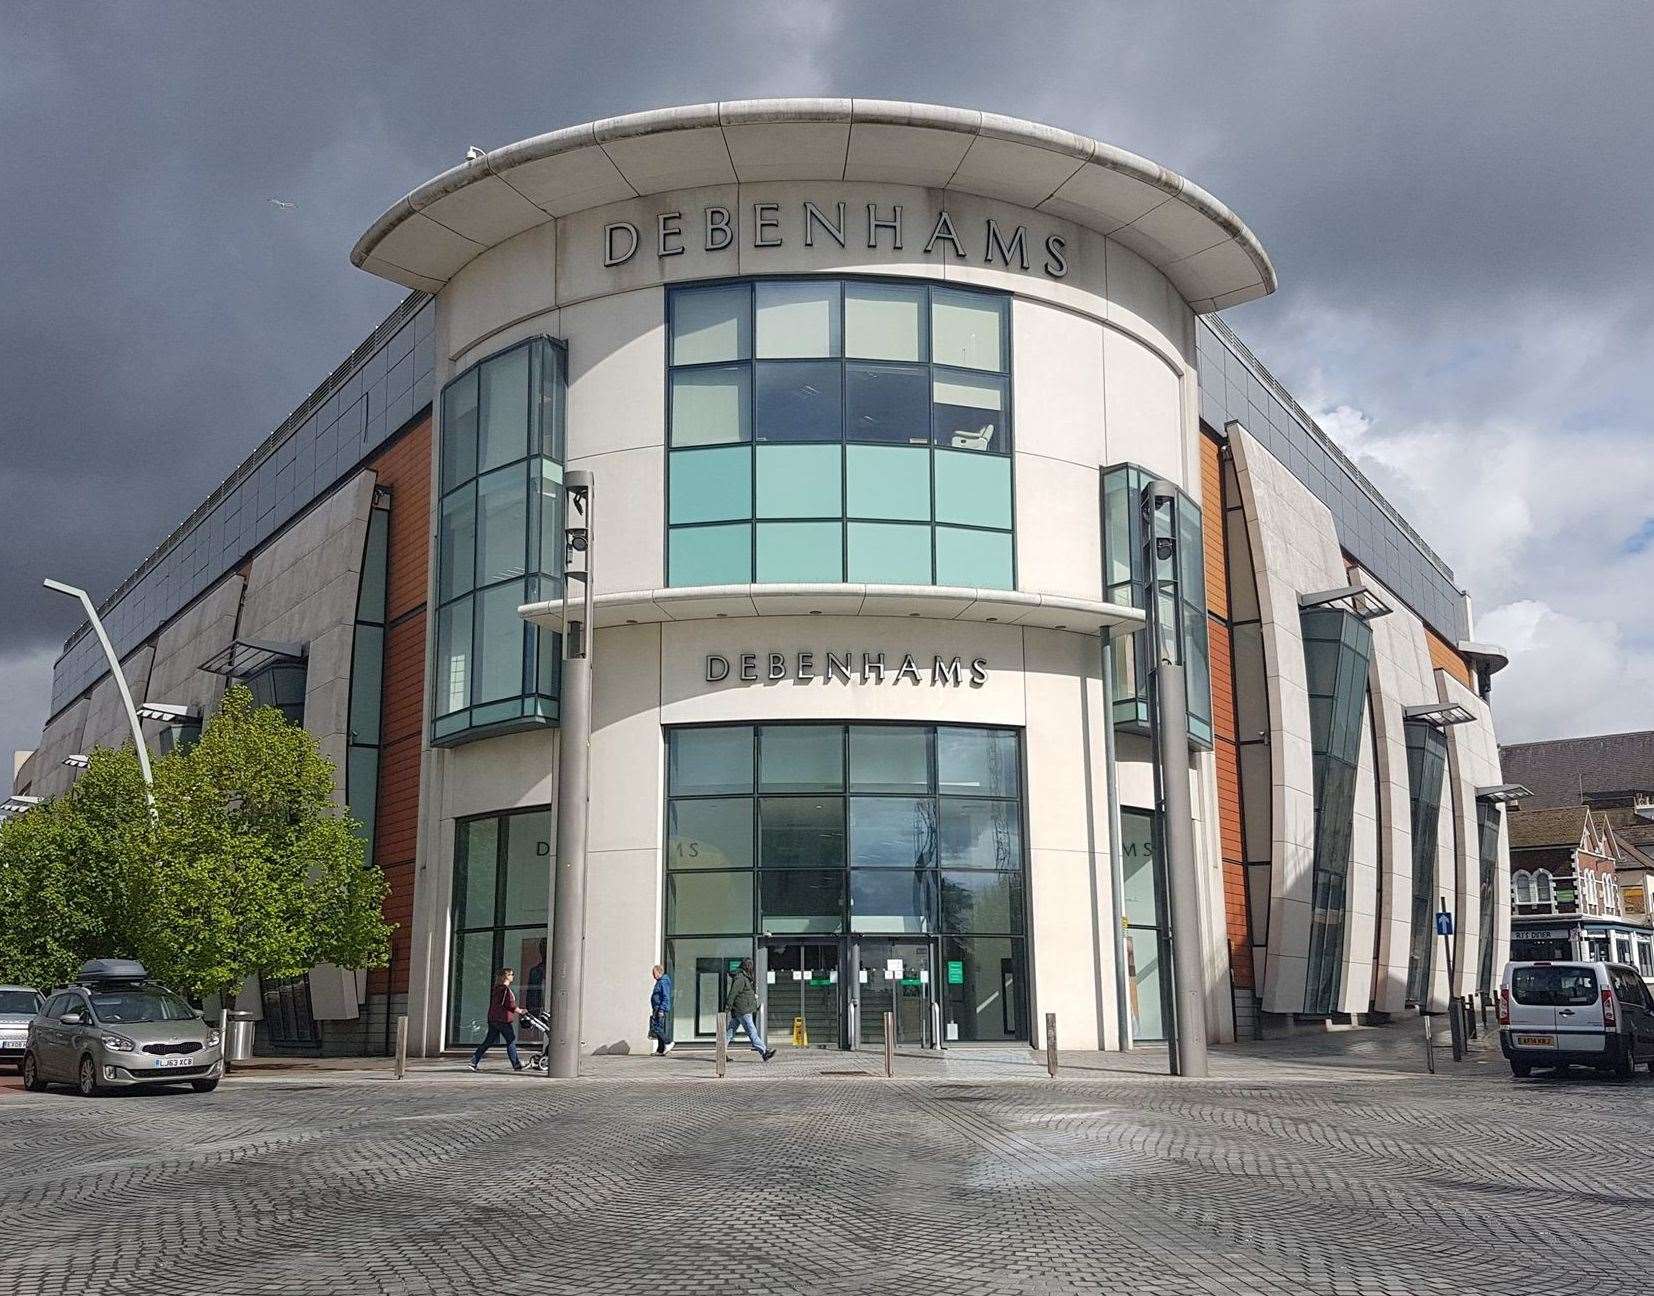 Debenhams in Ashford is a flagship store in County Square